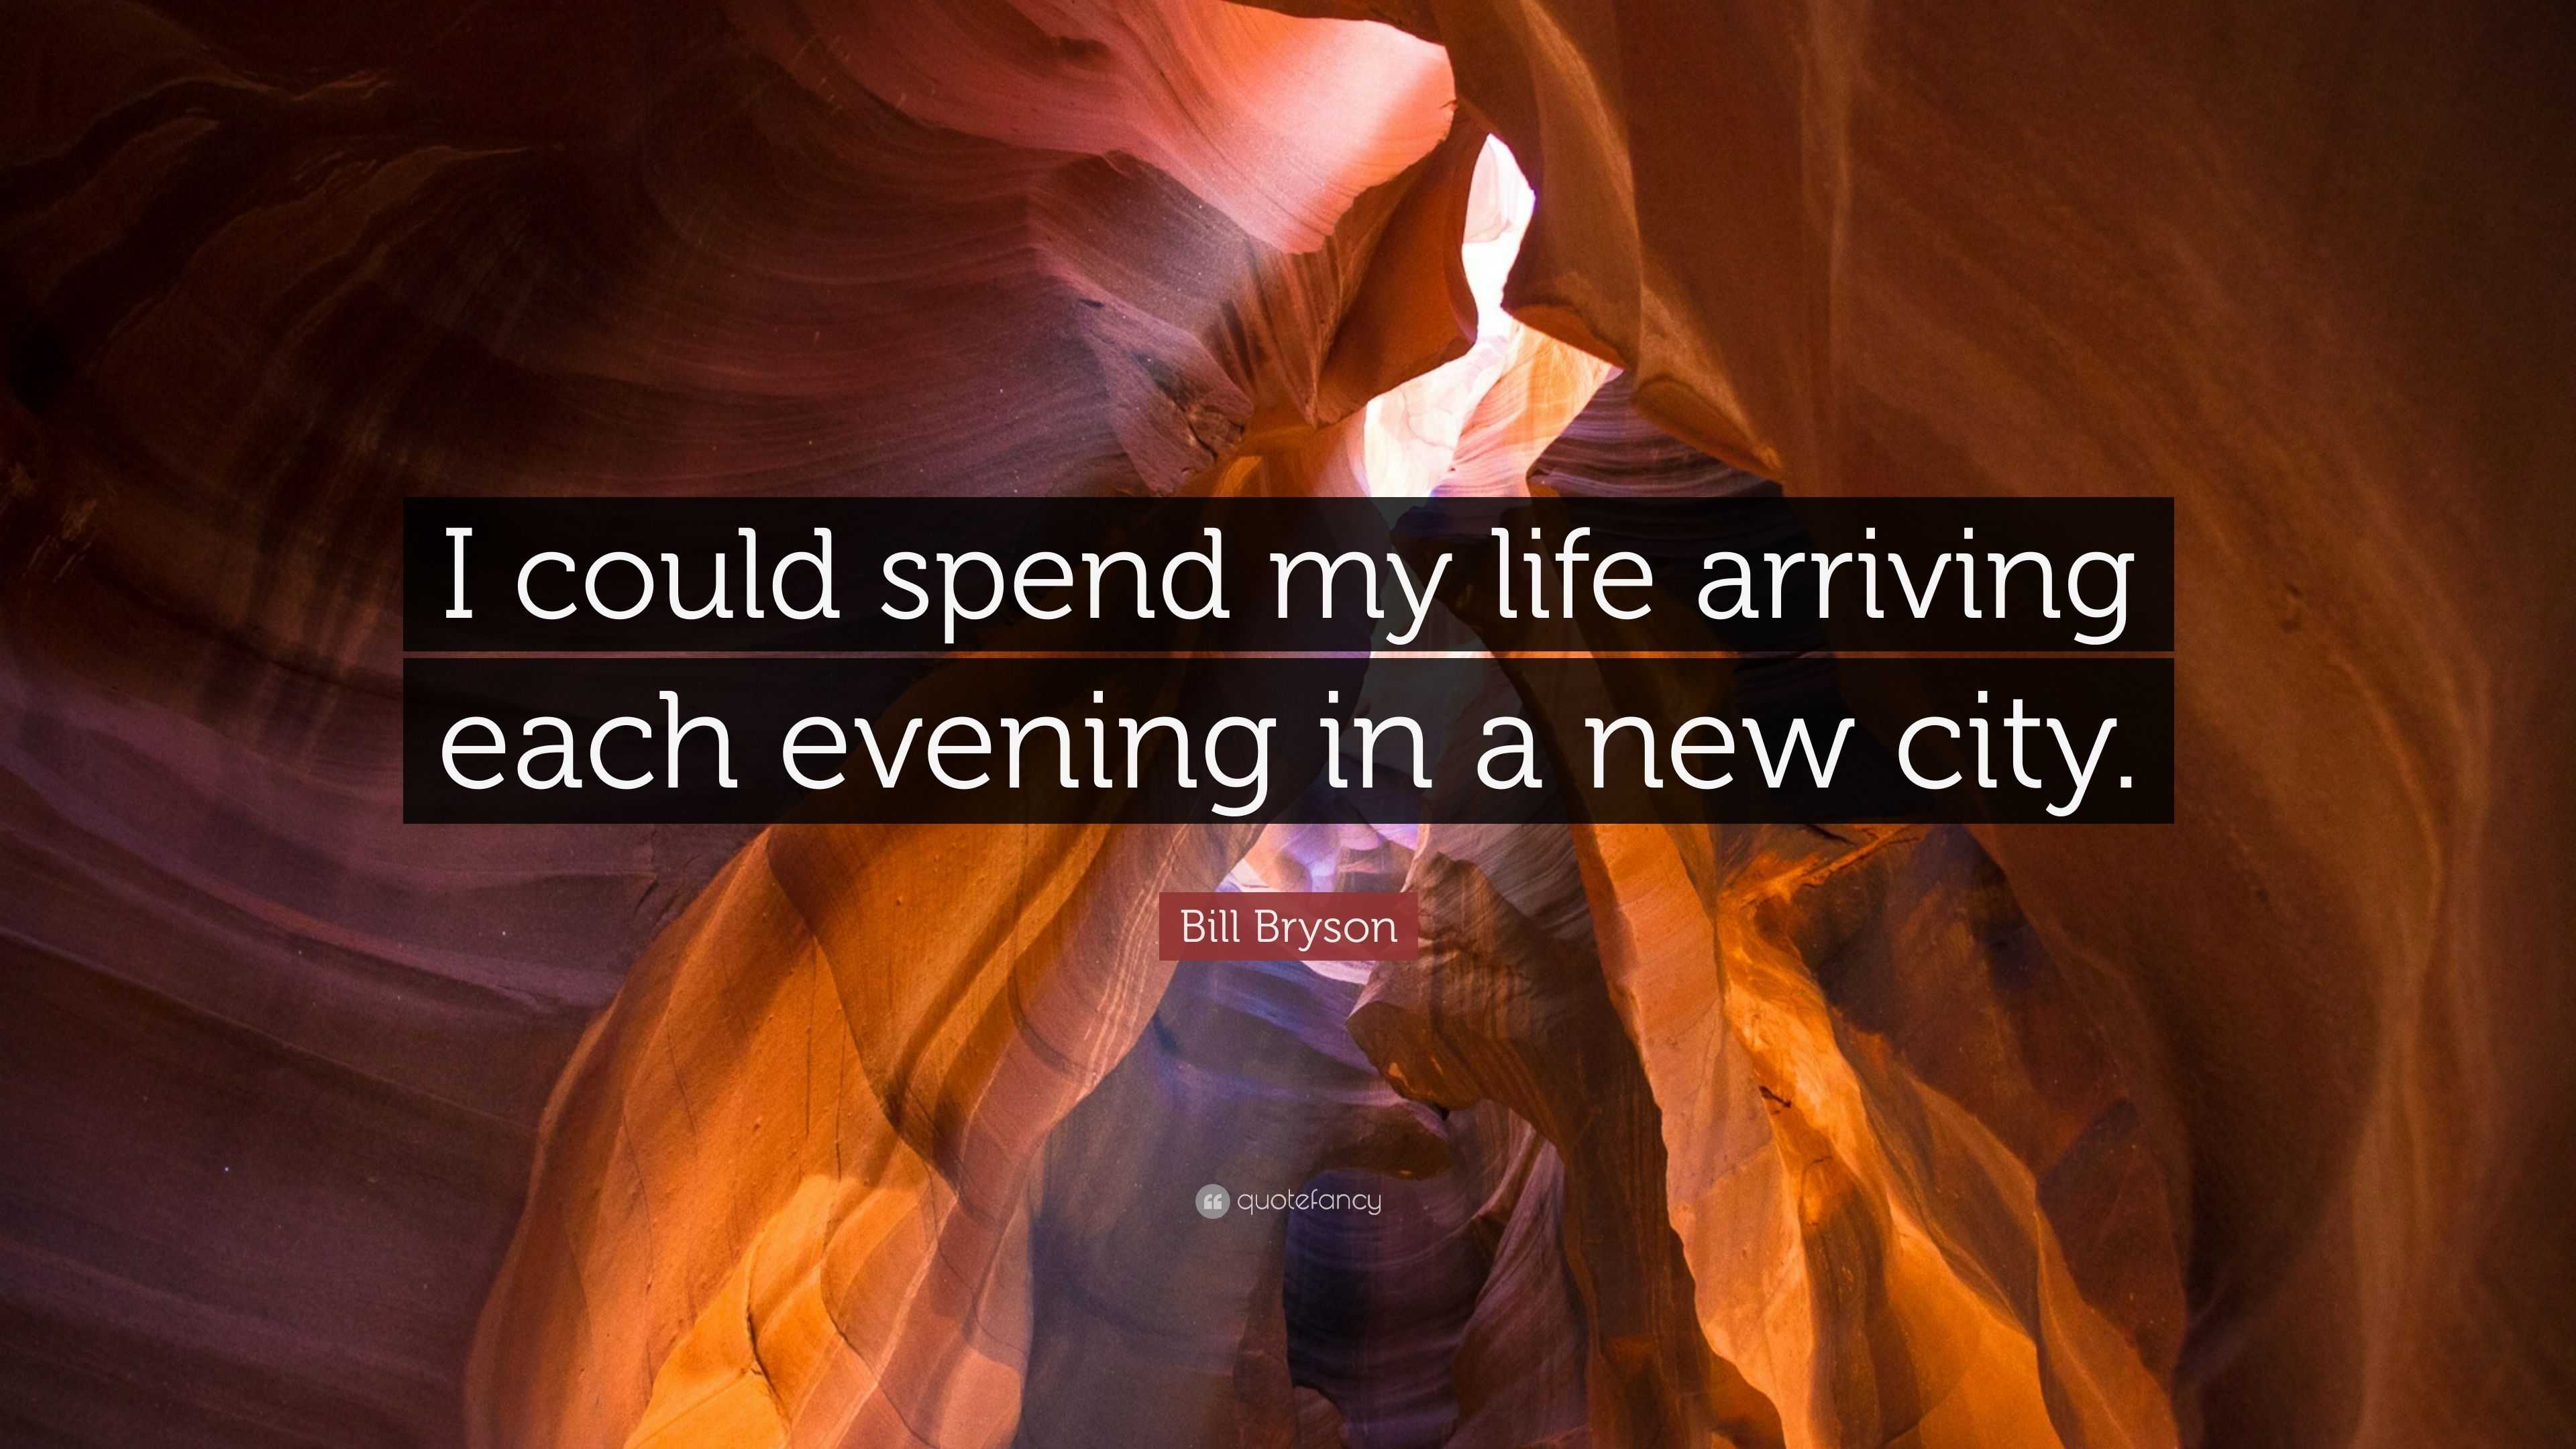 Bill Bryson Quote: “I could spend my life arriving each evening in a